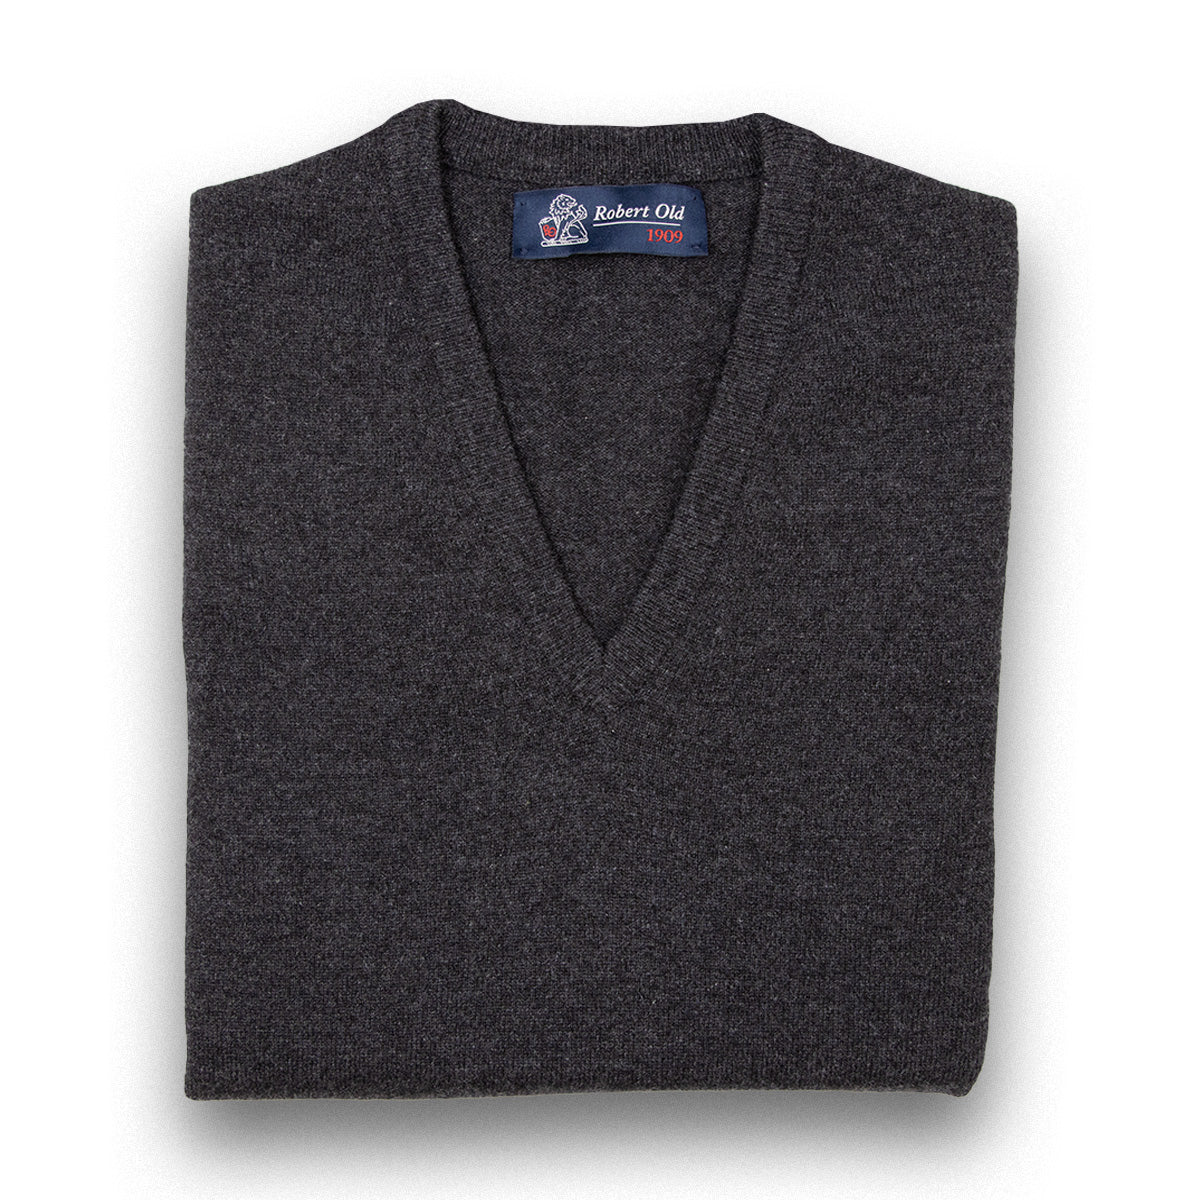 Charcoal Chatsworth 2ply V-Neck Cashmere Sweater  Robert Old Charcoal UK 48" 